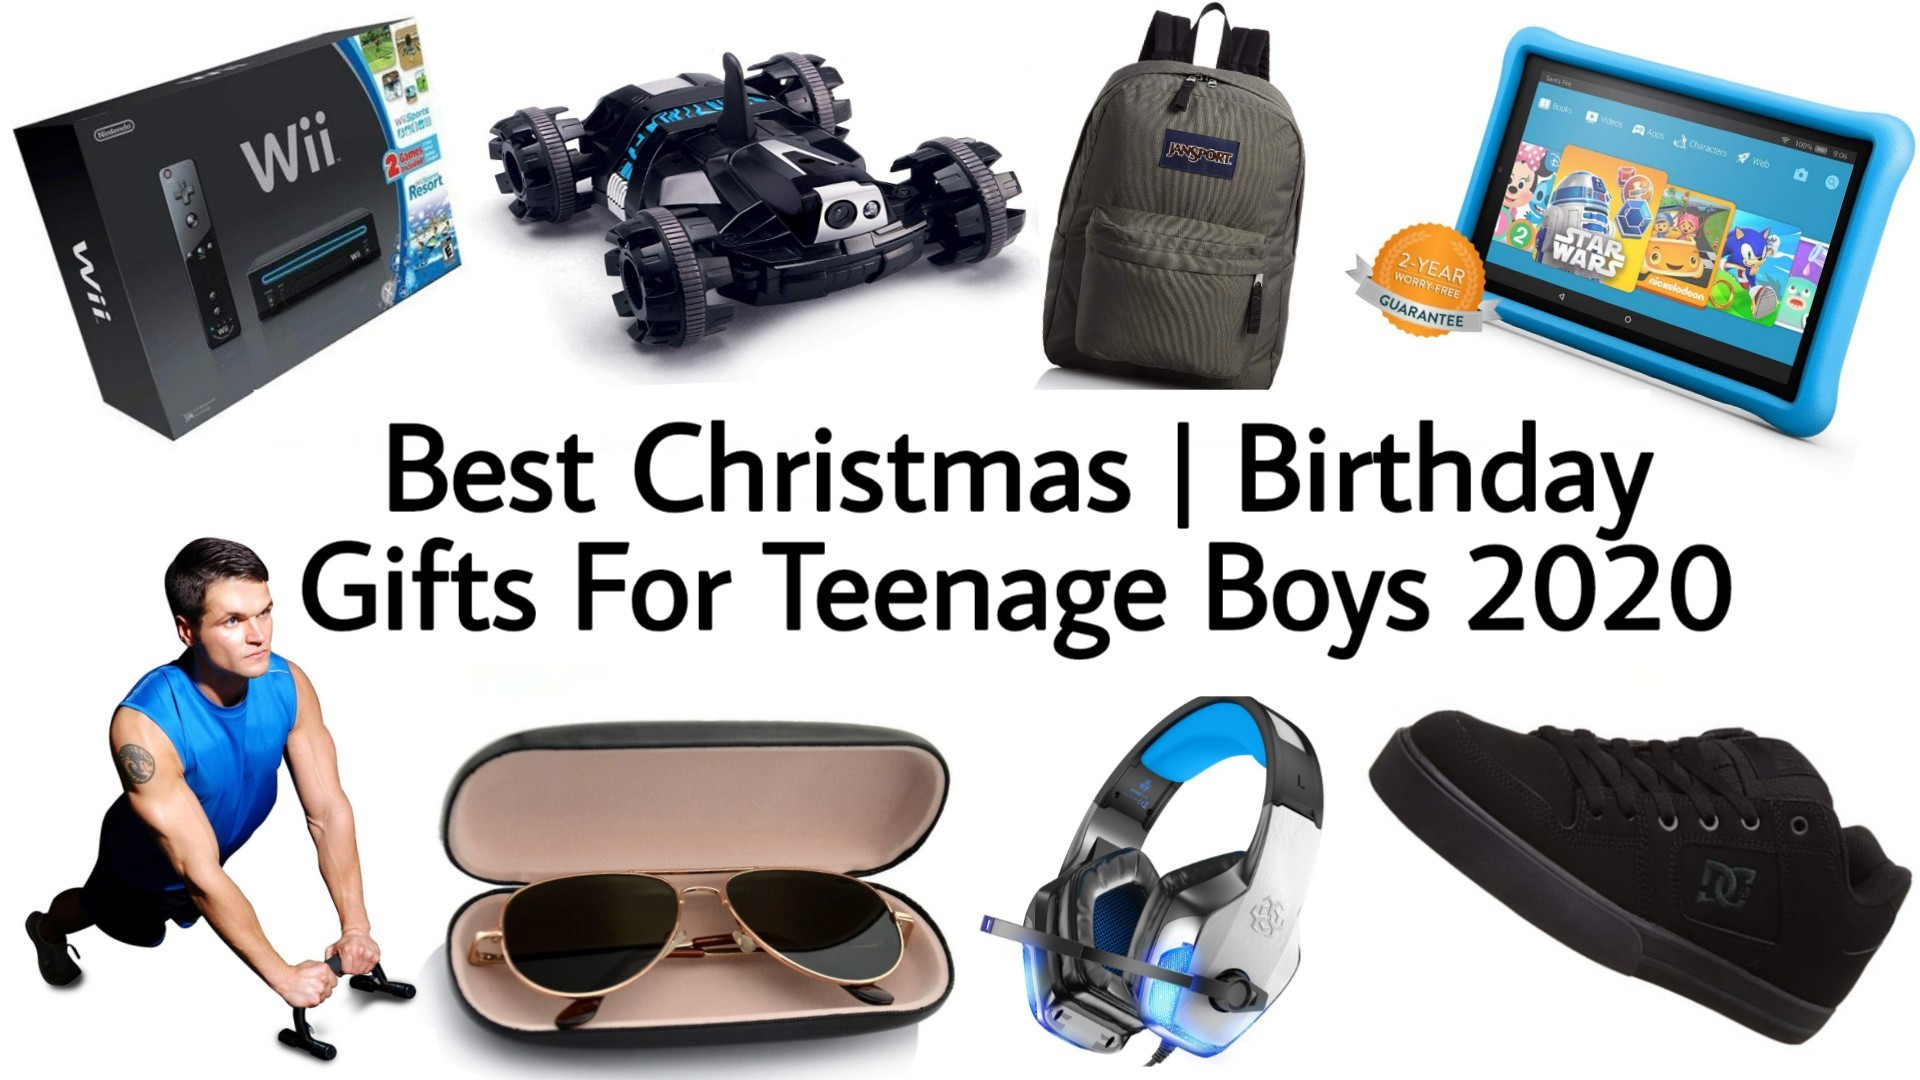 Gift Ideas Christmas 2020
 Best Christmas Gifts for Teenage Boys 2020